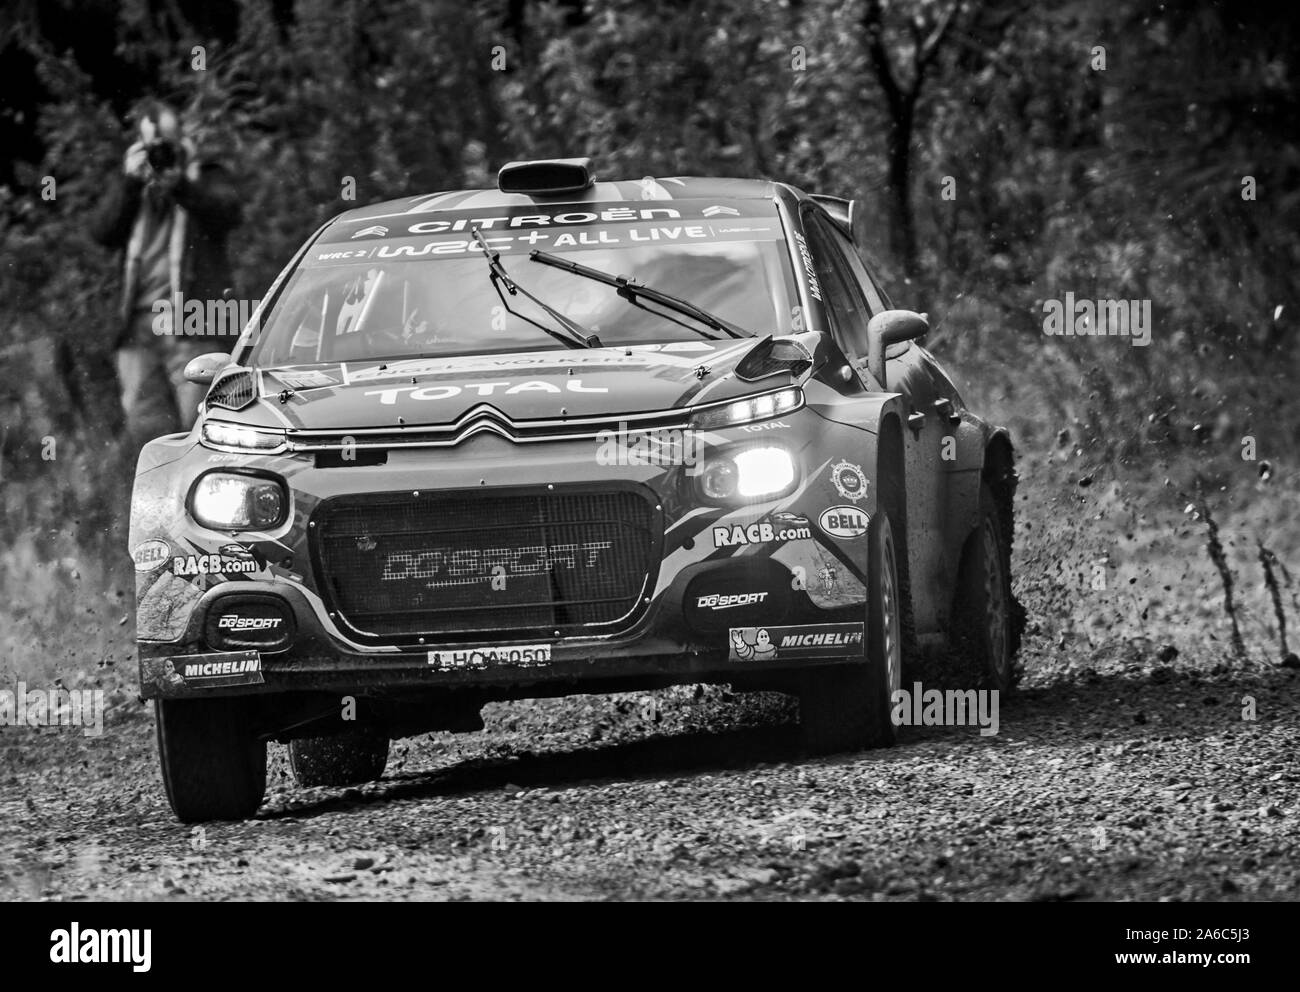 Car 56, Driver Guillaume De Mevius, Co-Driver Martijn Wydaeghe, Wales Rally GB, Day Three, Brenig Forest Stage Stock Photo